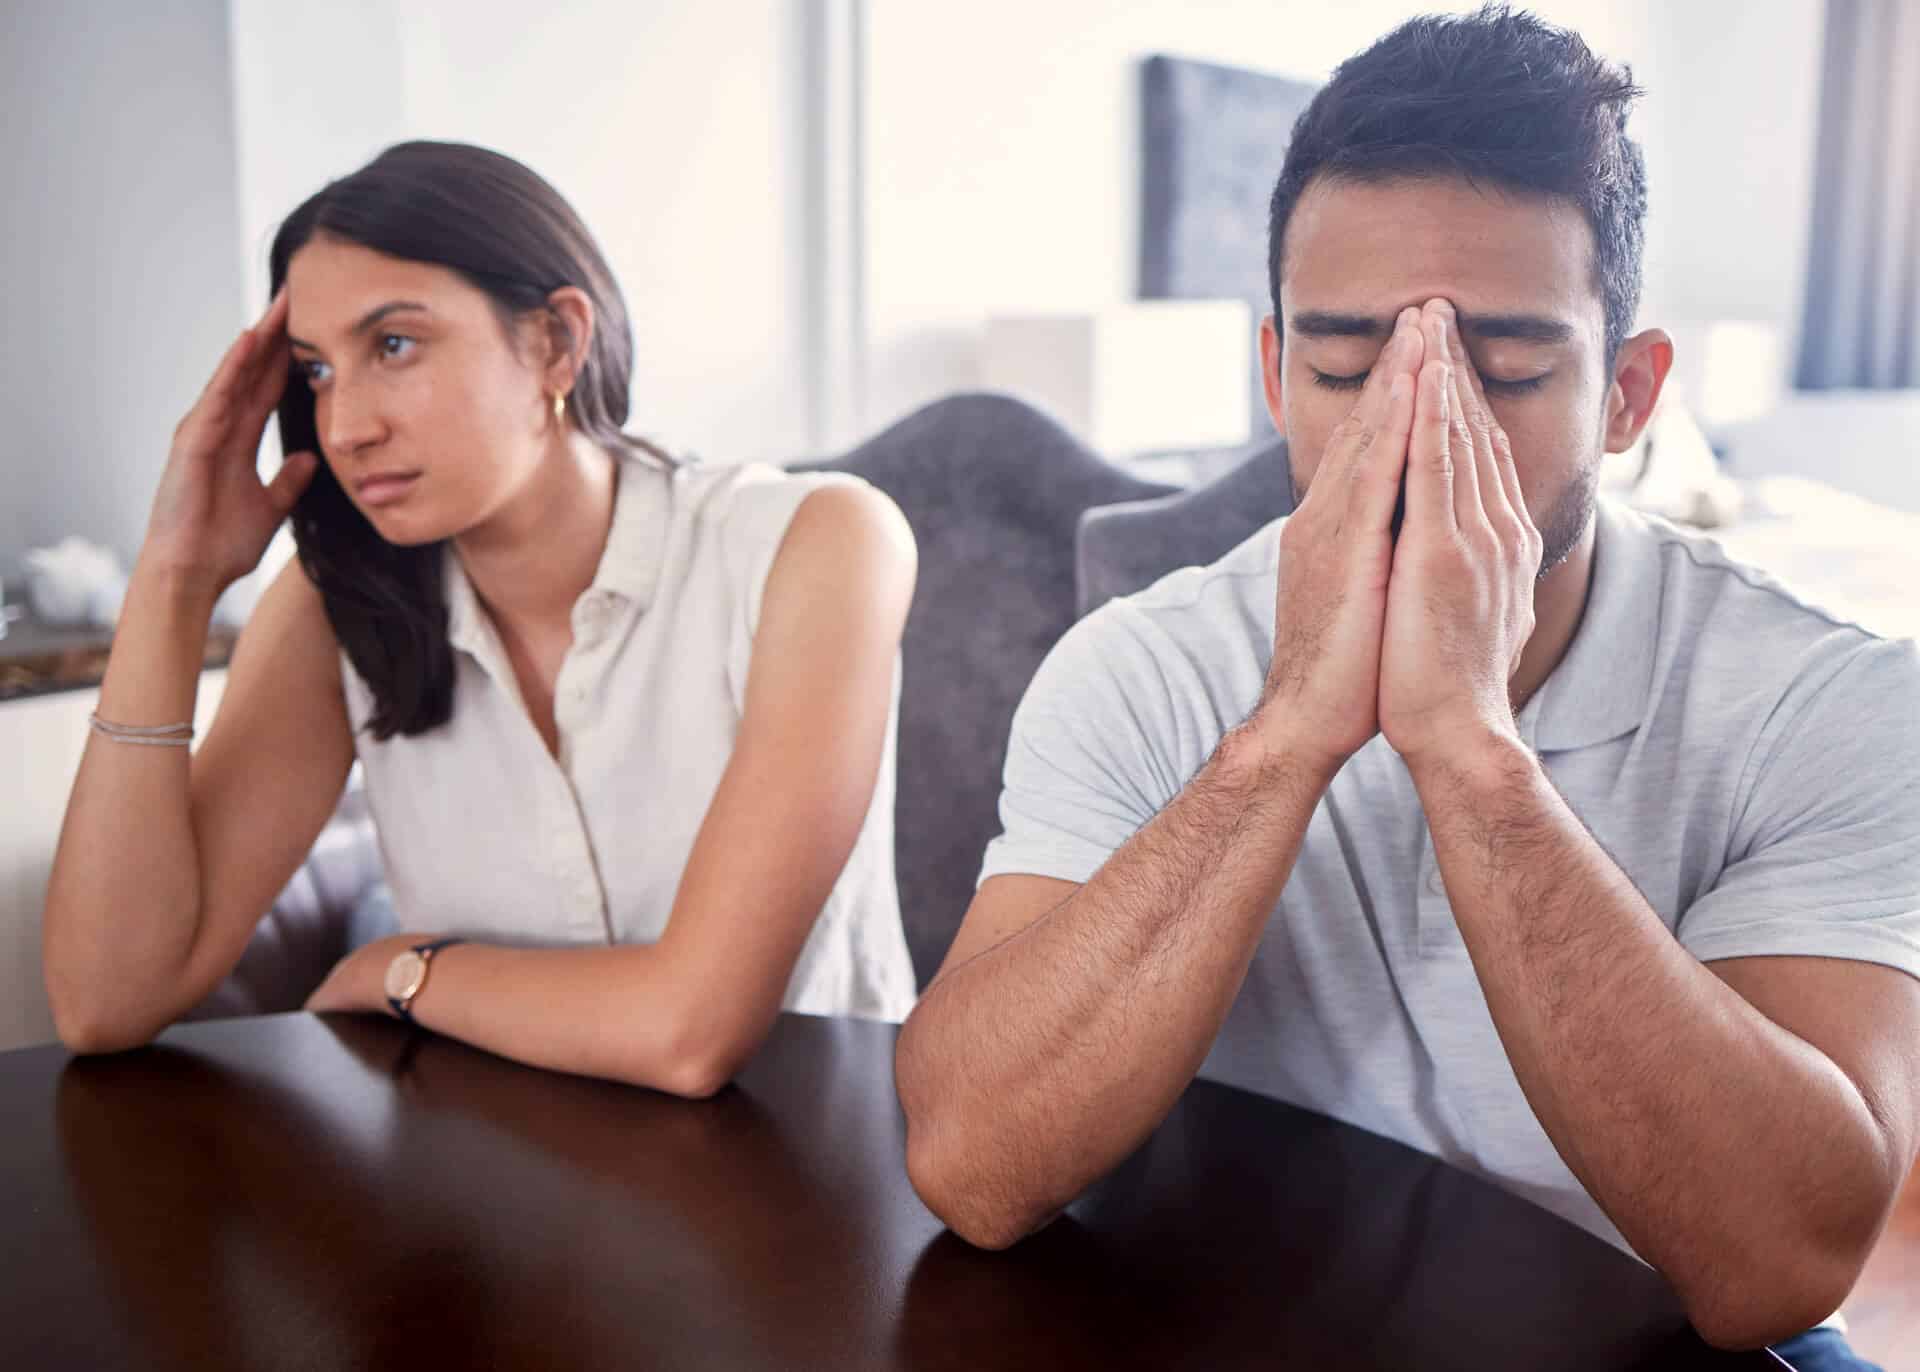 couple having relationship problems